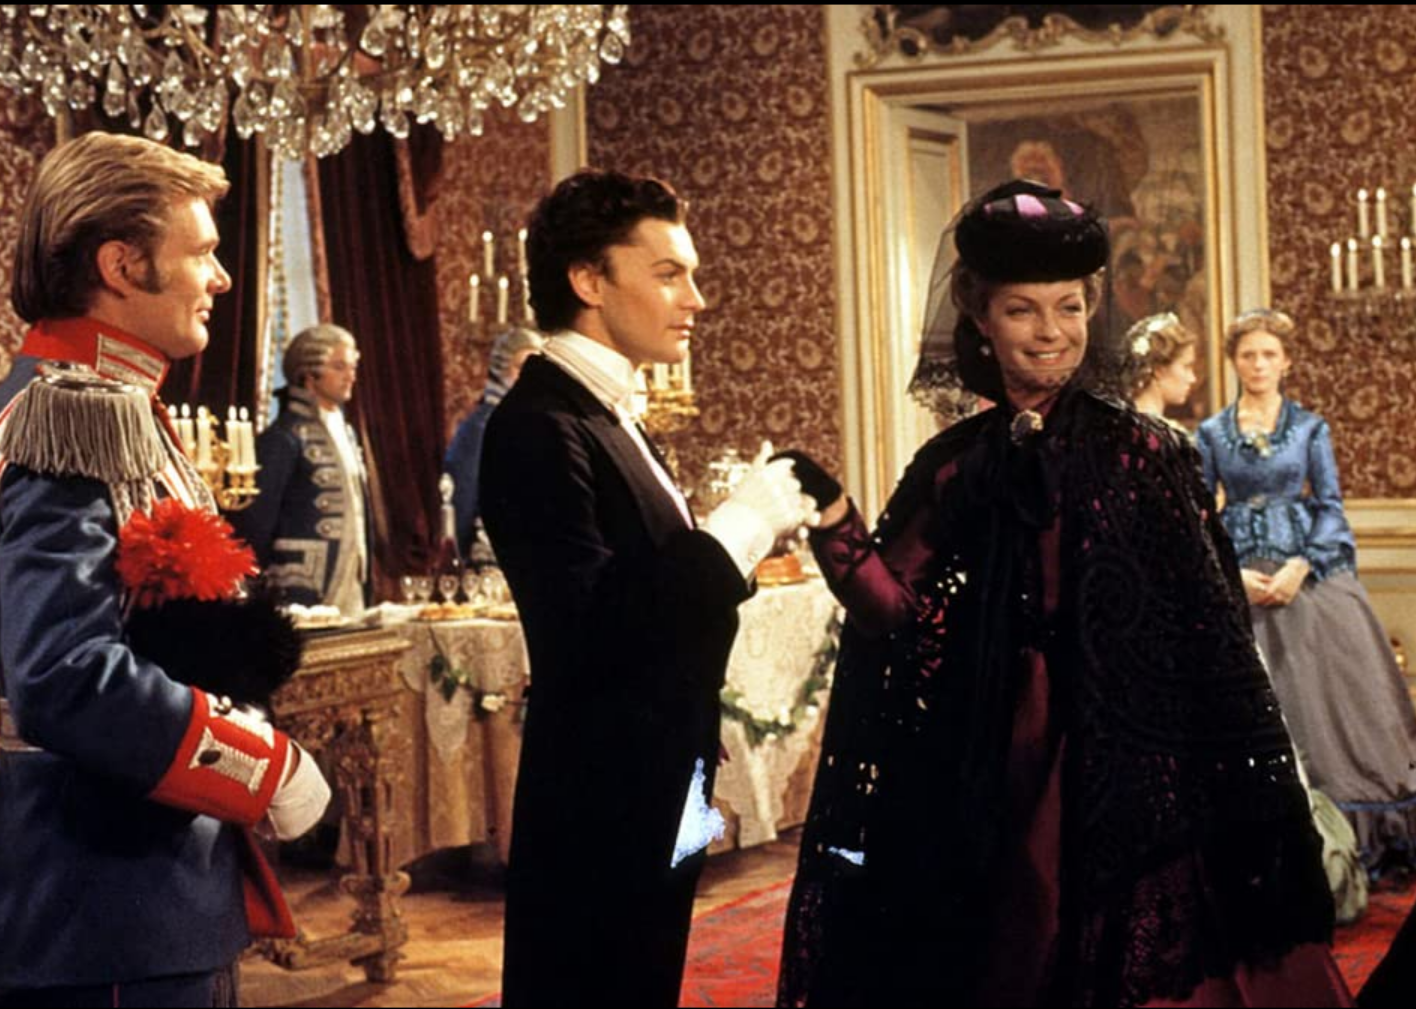 Helmut Berger, Romy Schneider, and Helmut Griem in a scene from "Ludwig".